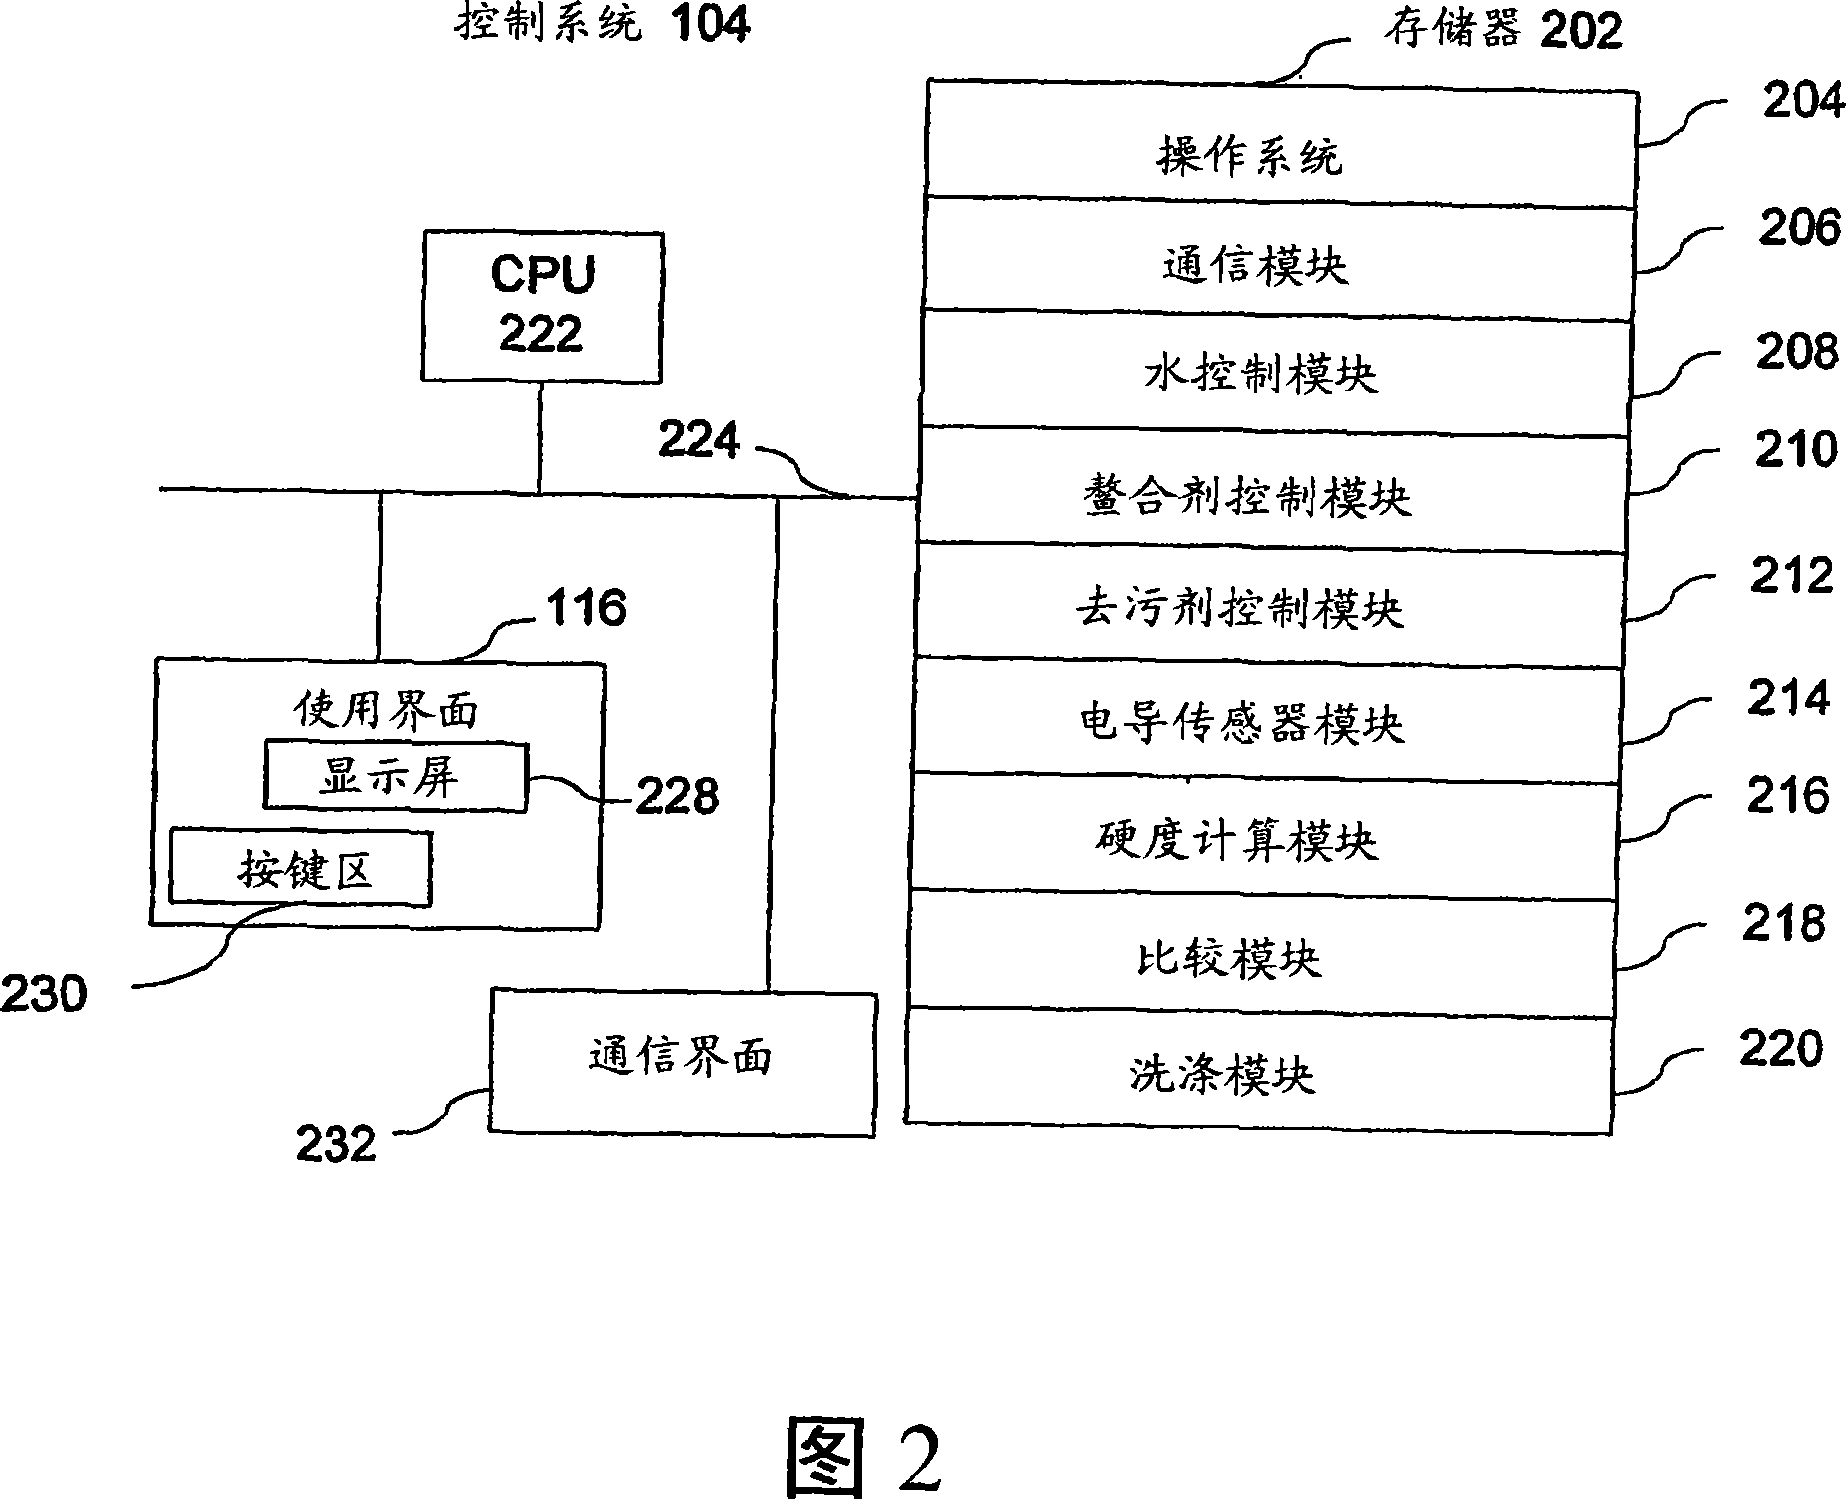 Method and system for measuring water hardness